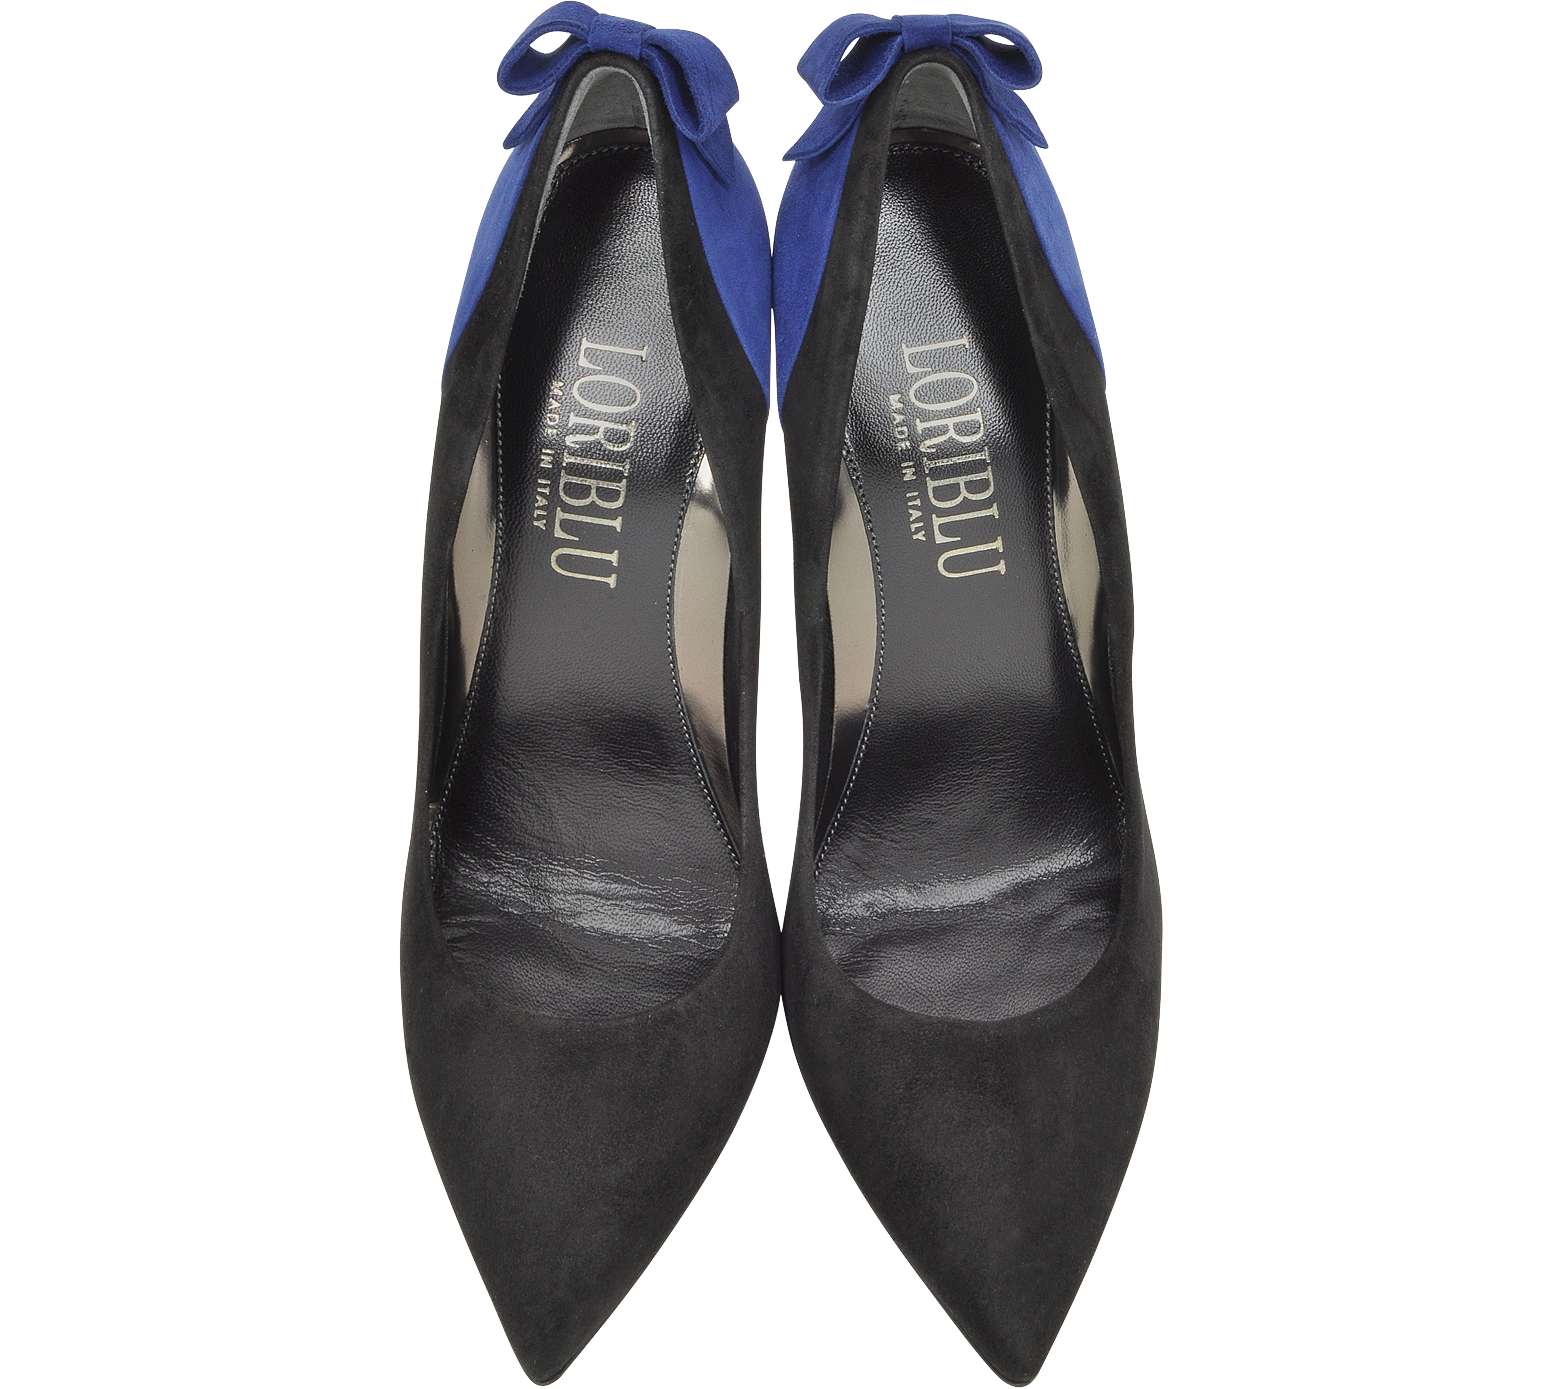 Loriblu Pointed Black and Blue Suede Pump 36 IT/EU at FORZIERI